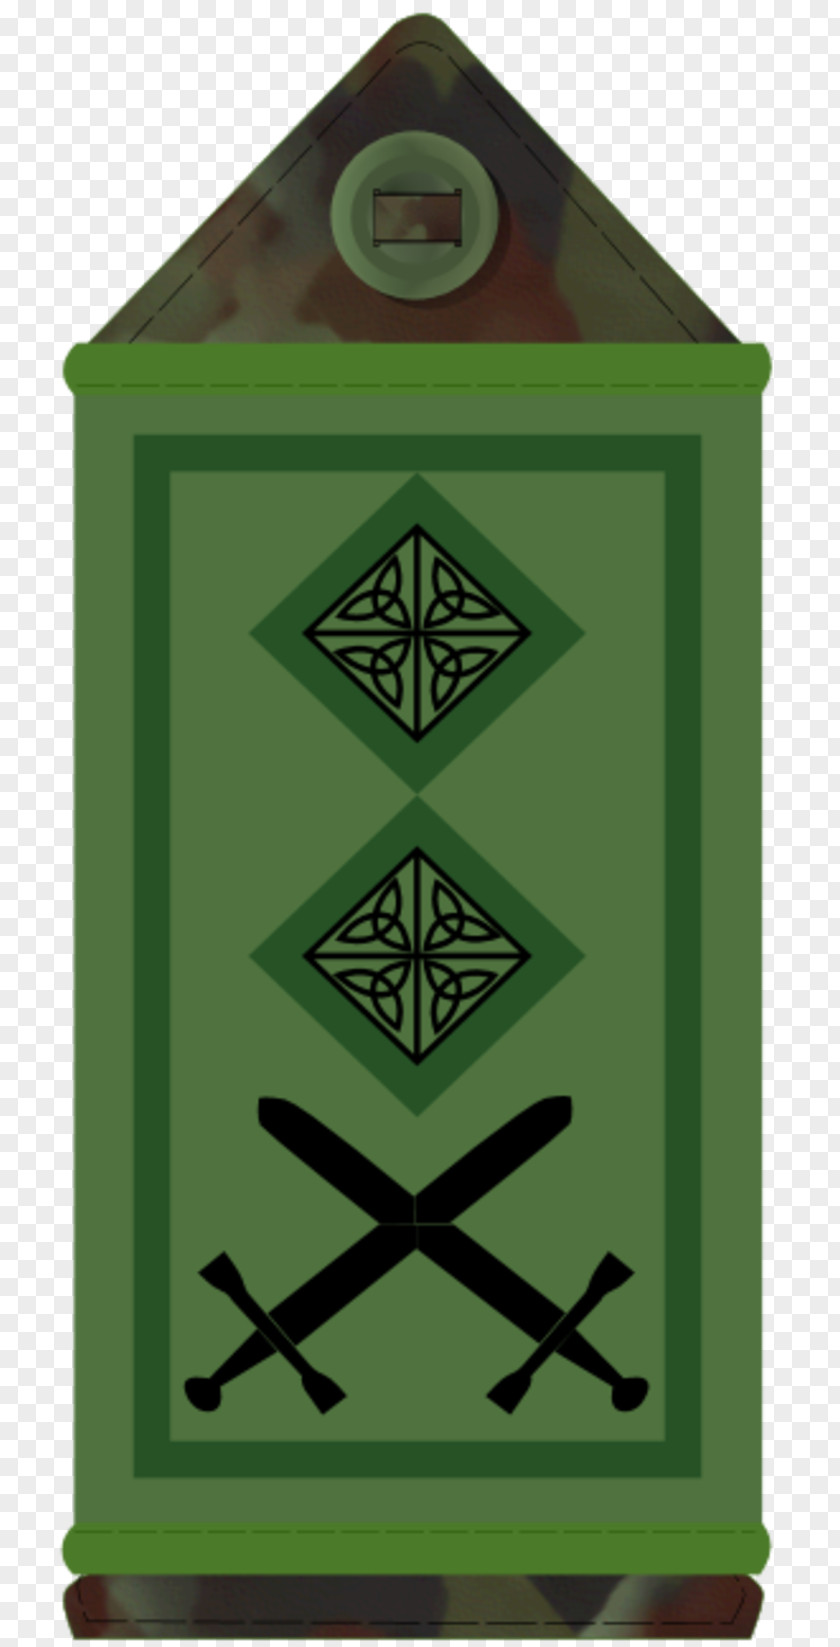 Military Corporal Sergeant Rank Non-commissioned Officer Army PNG